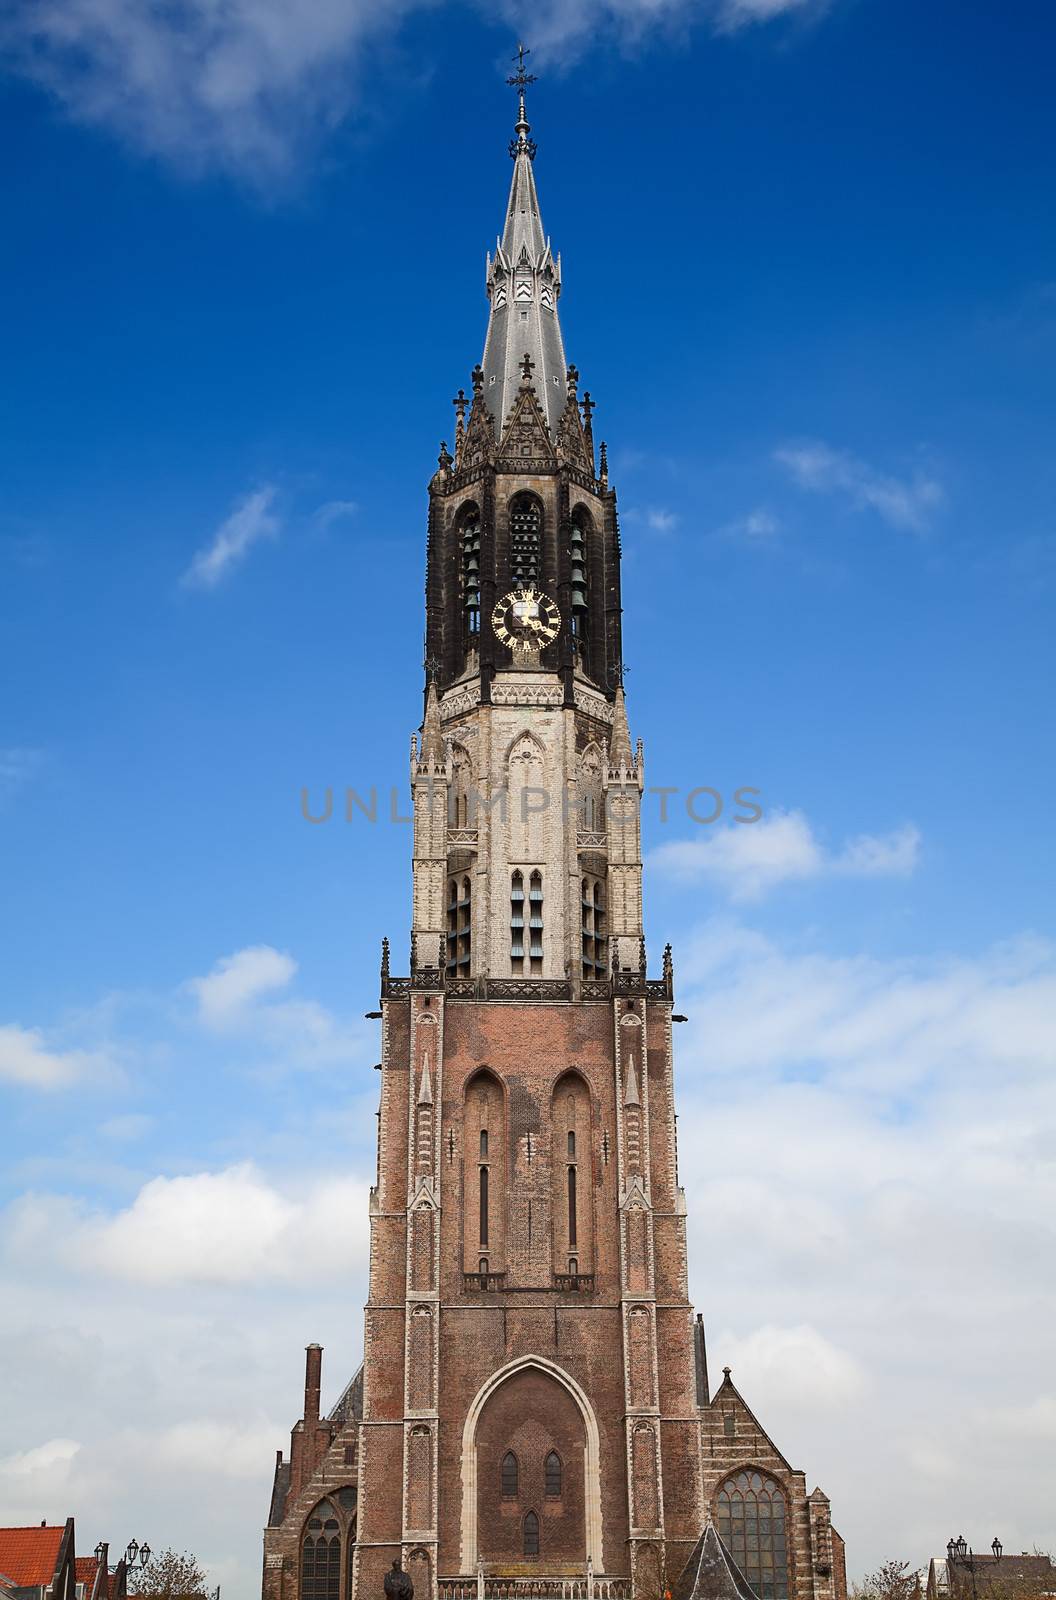 Famous "new church" of Delft, Netherlands